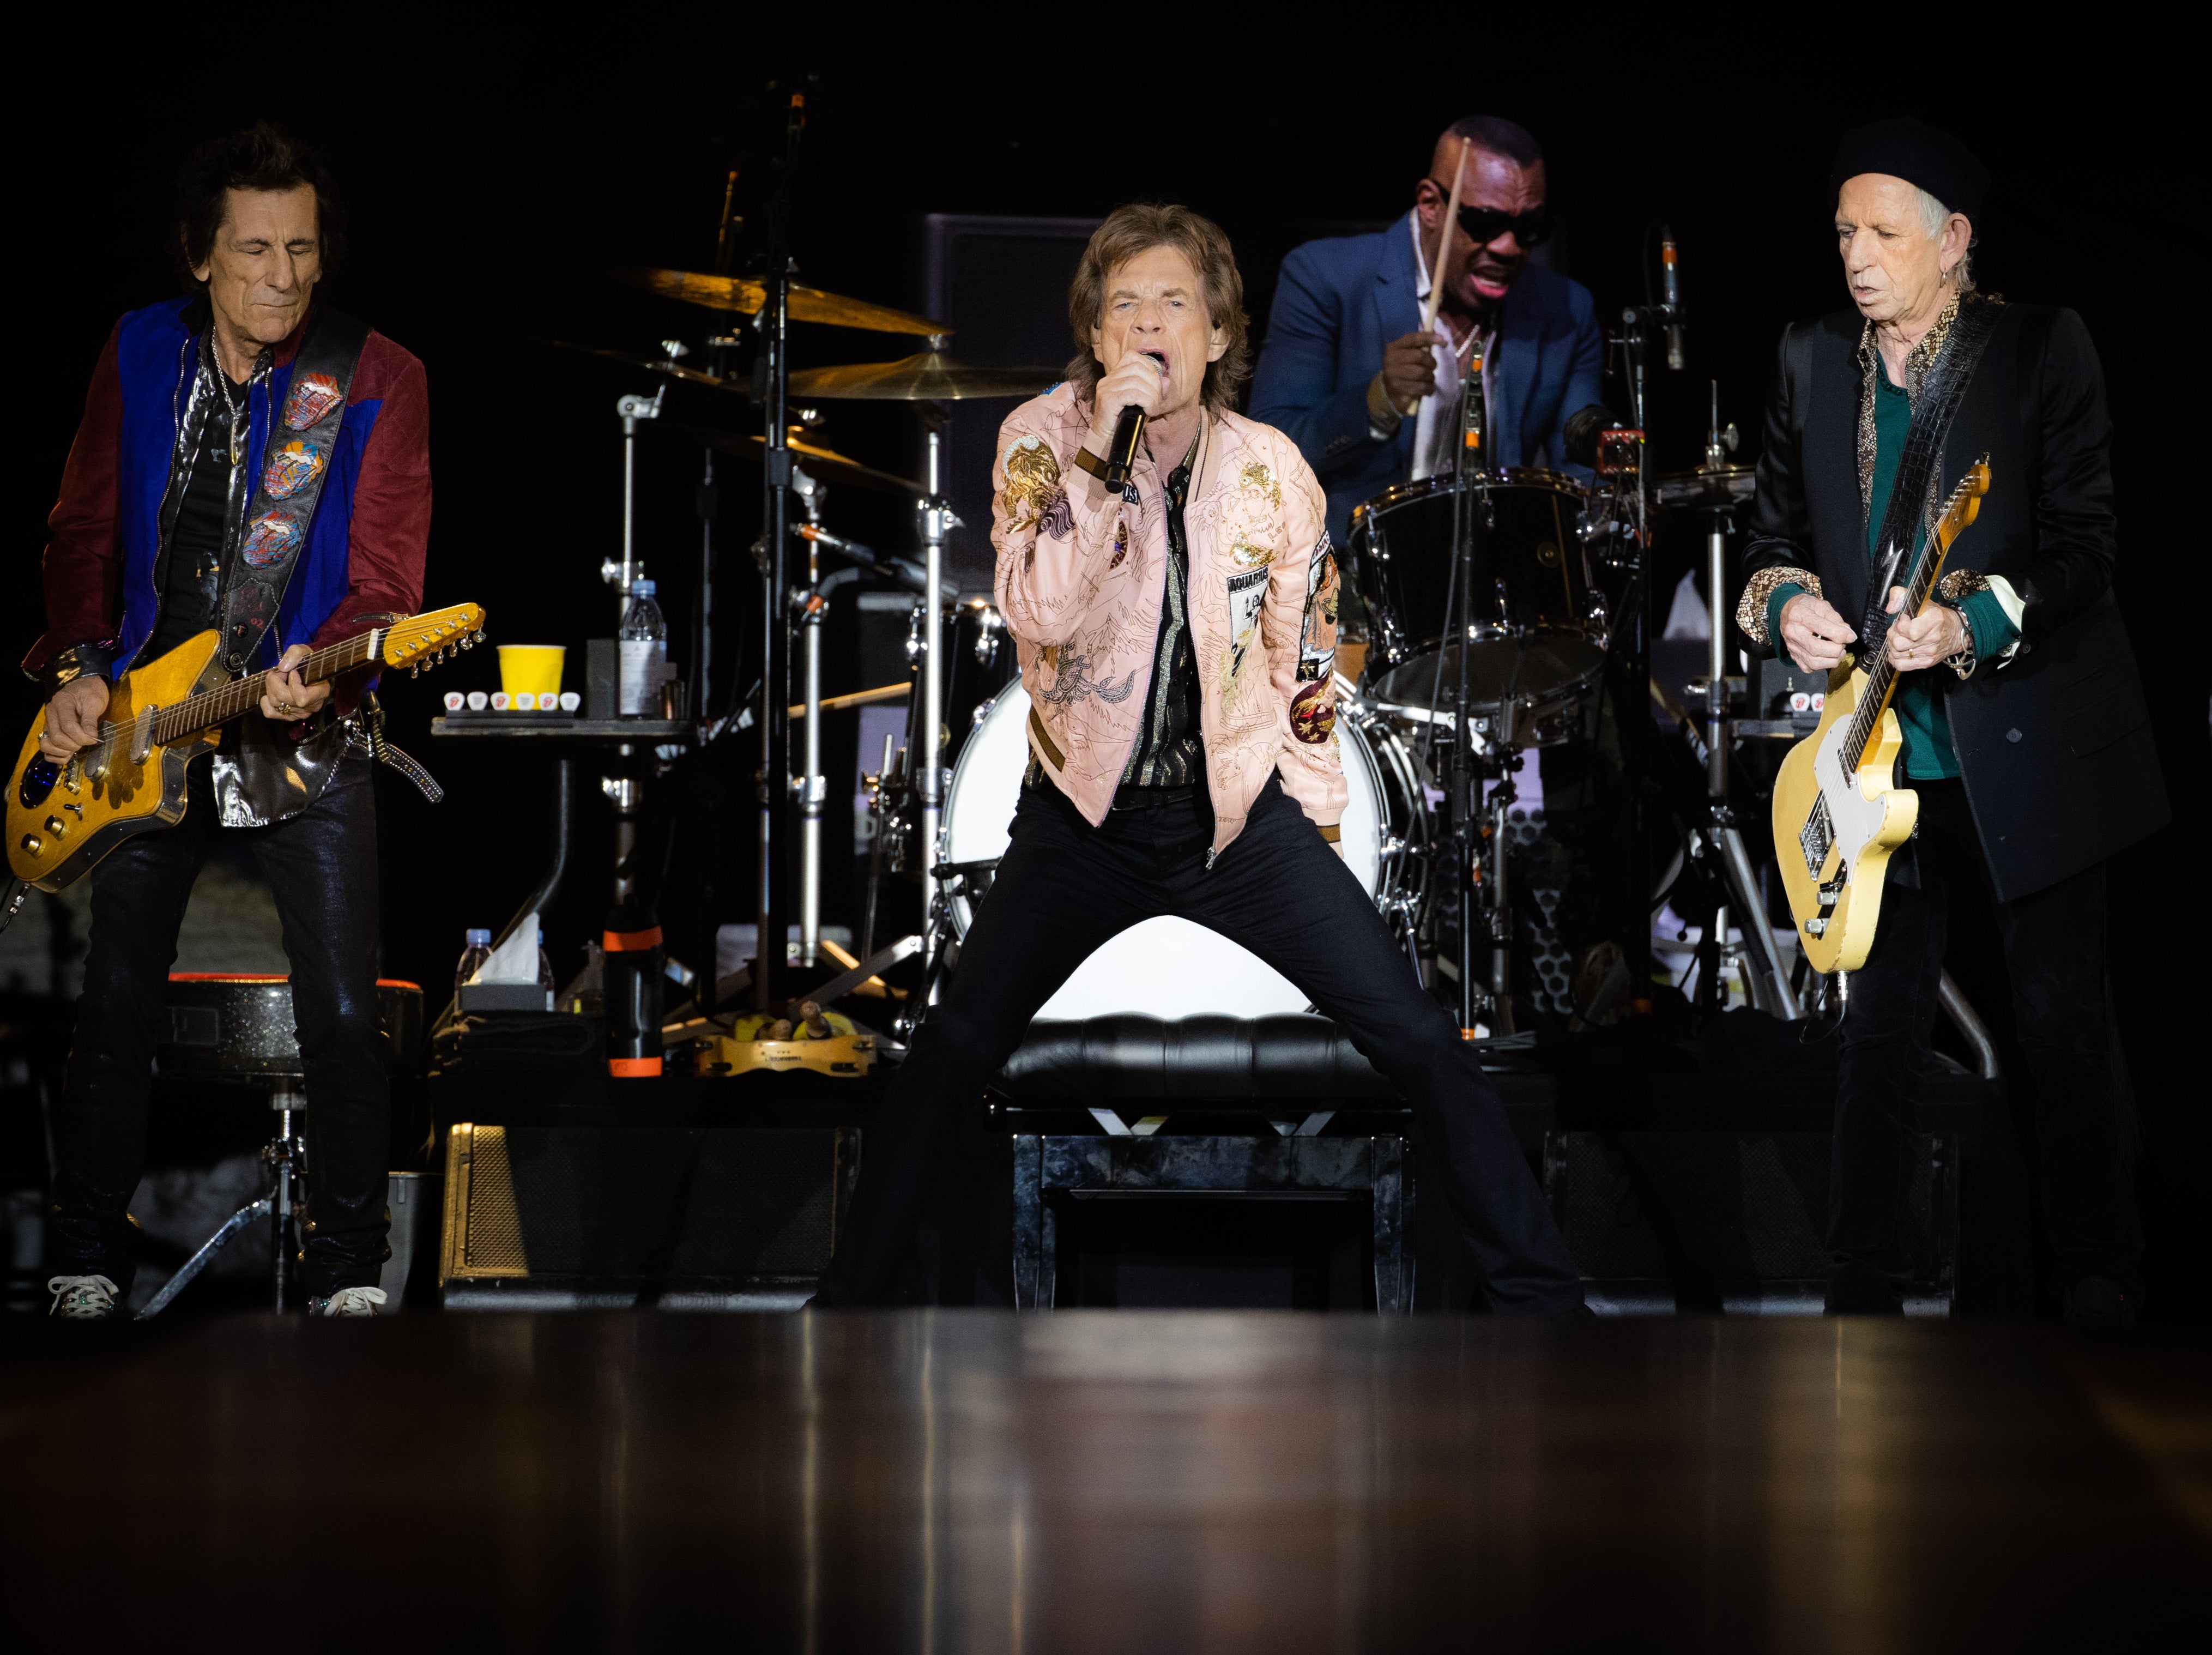 Ronnie Wood, Mick Jagger, Steve Jordan and Keith Richards of The Rolling Stones perform onstage at SoFi Stadium, 2022